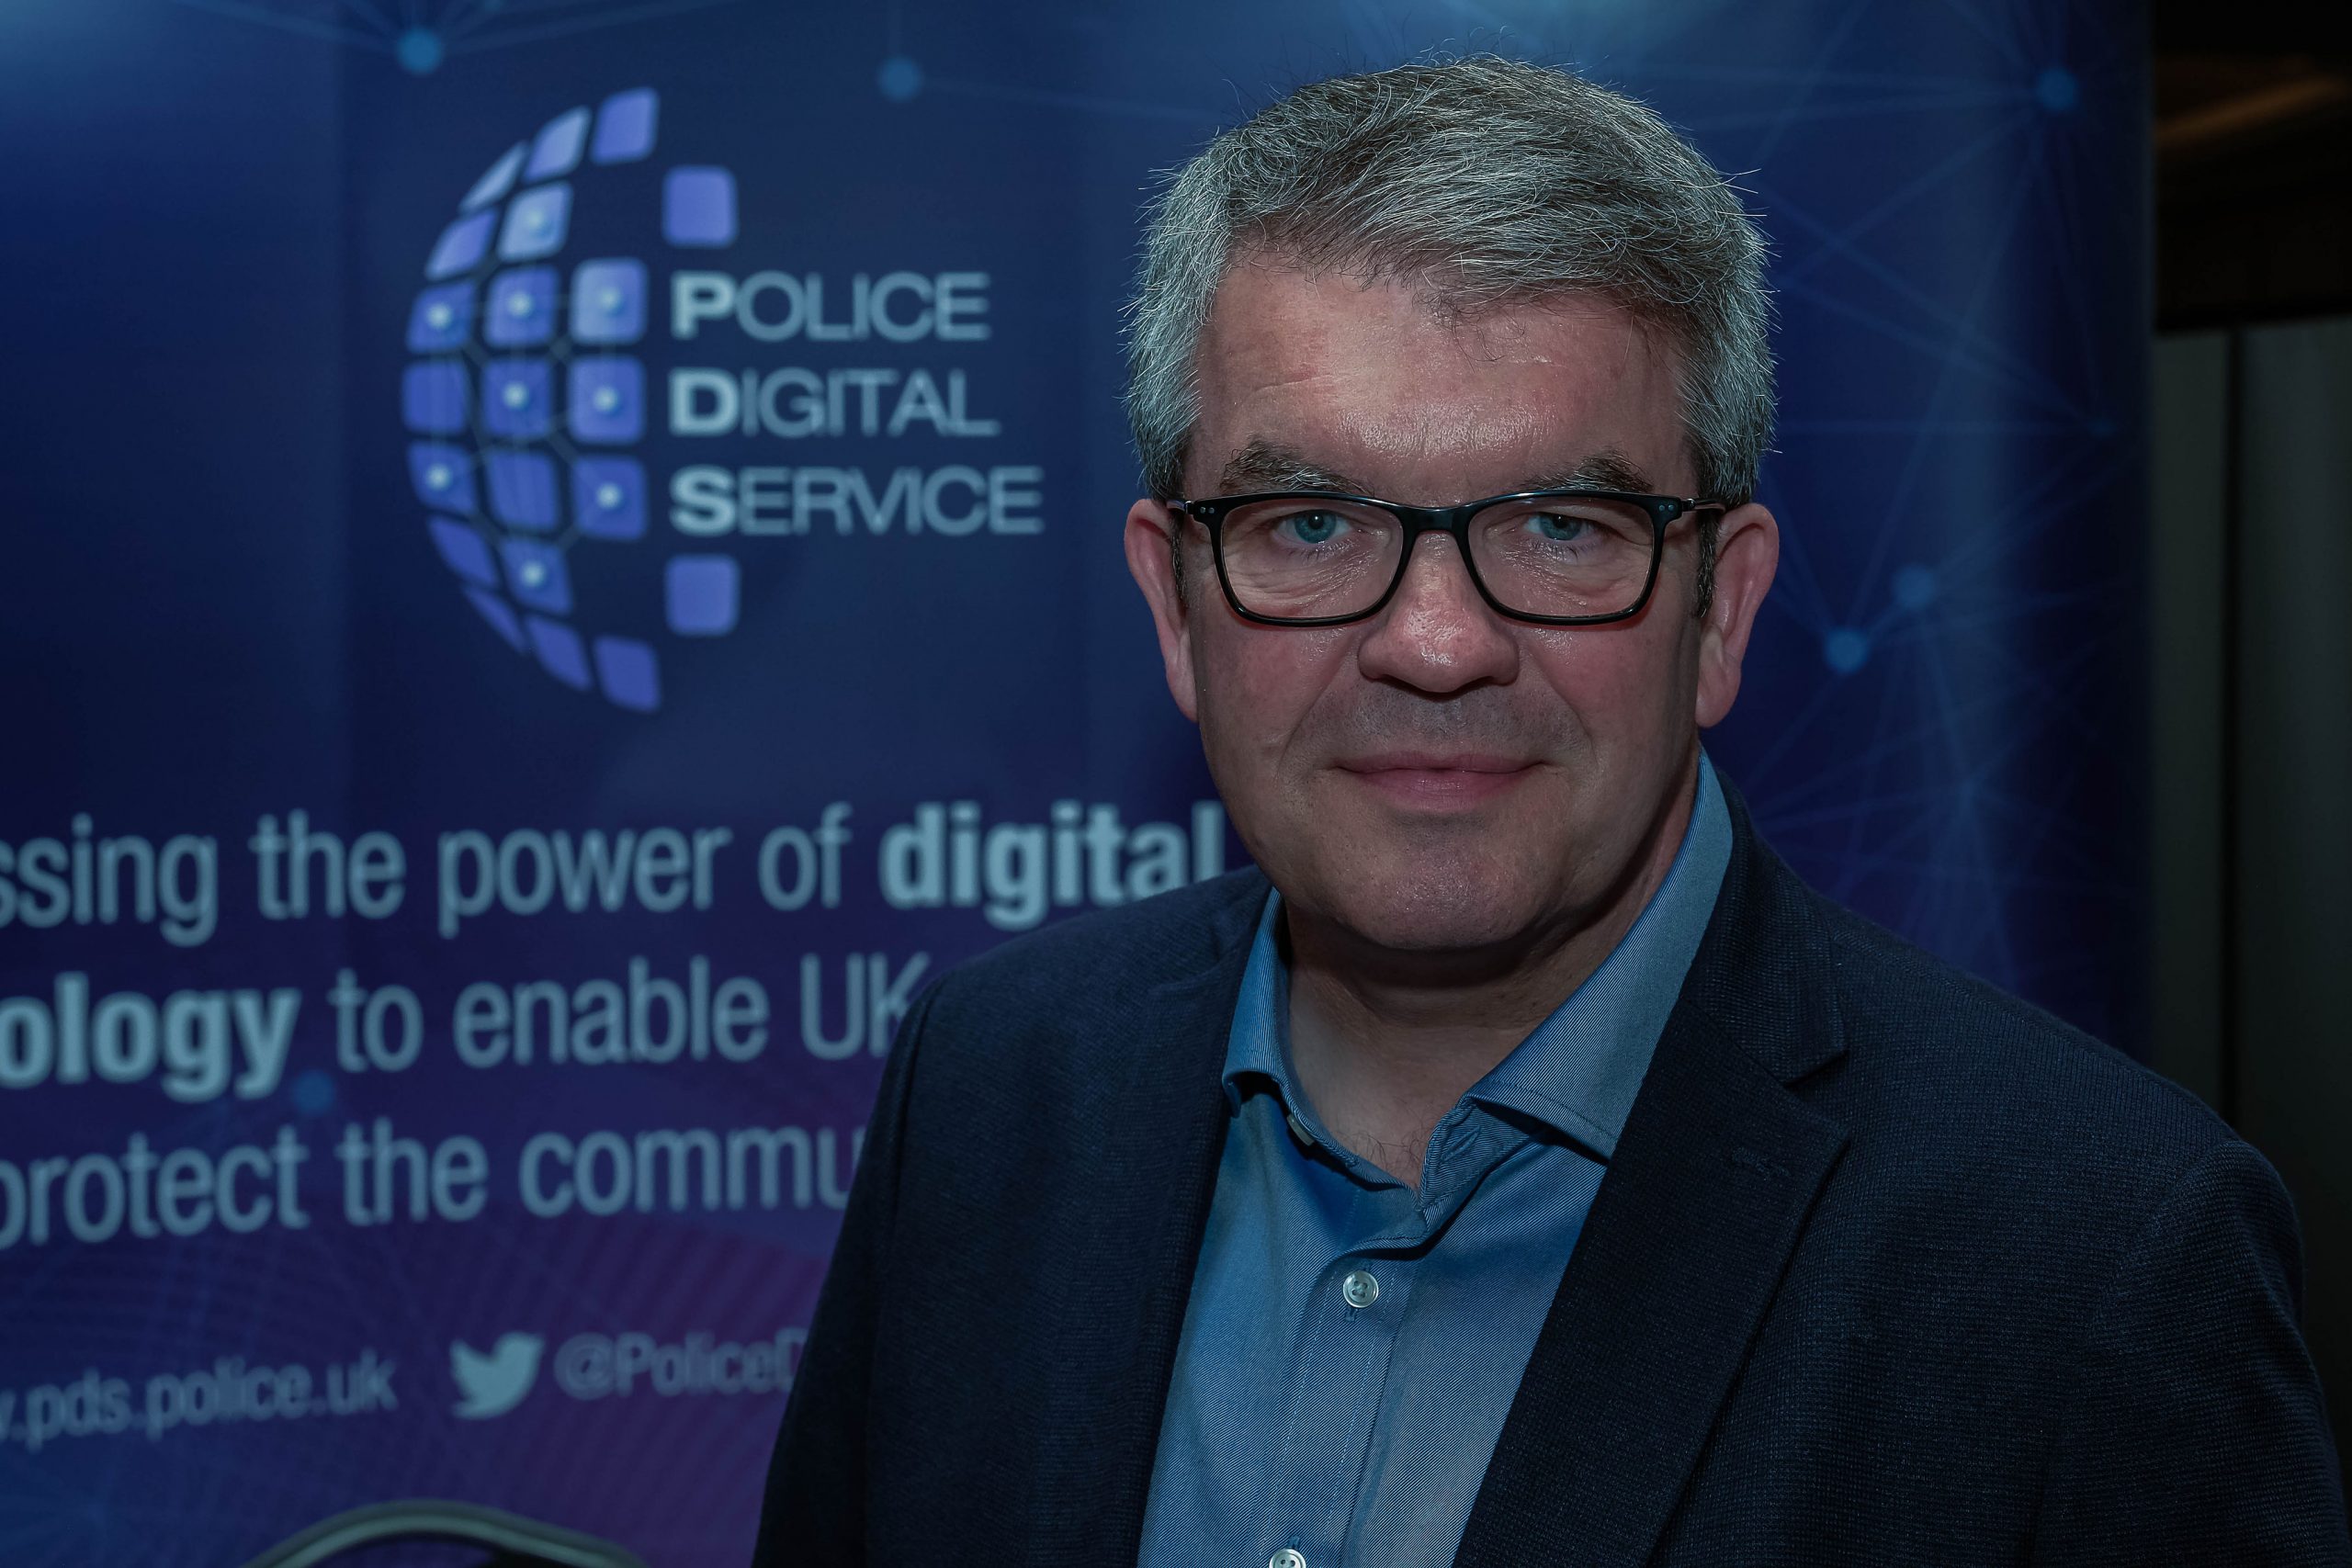 Martin Hewitt, Chair of National Police Chief's Council